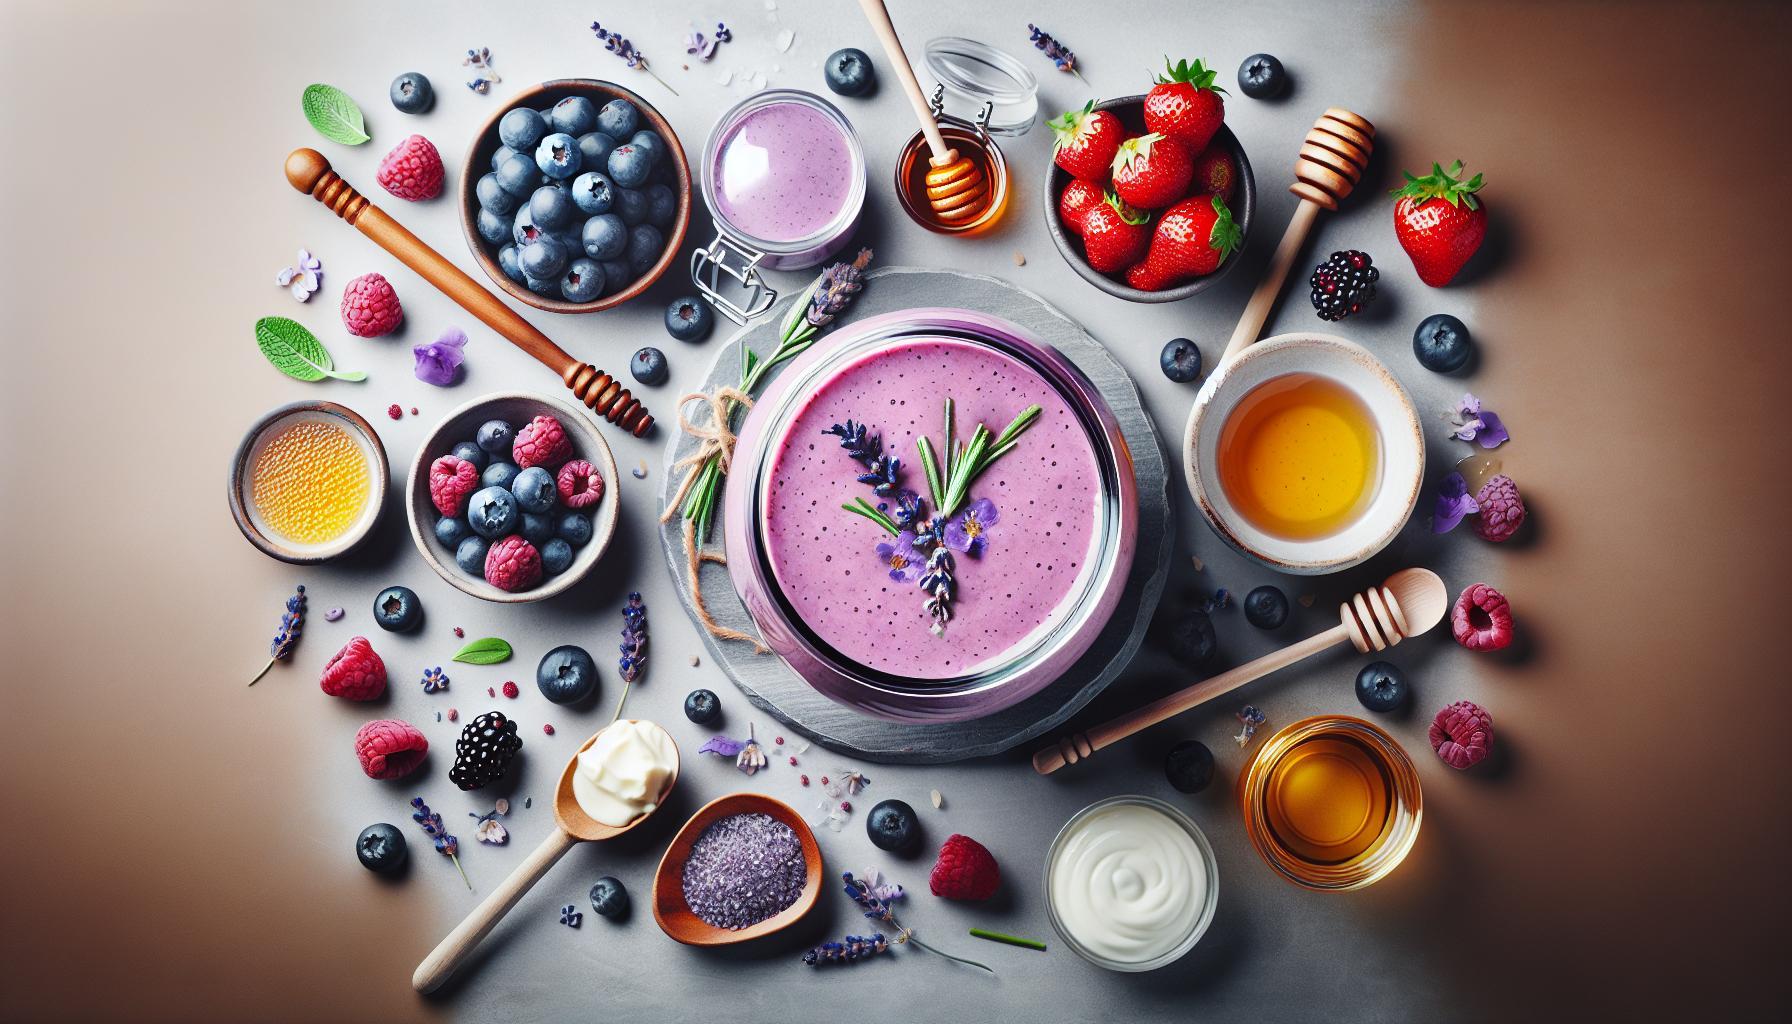 Refreshing Mixed Berry and Lavender Smoothie – The Perfect Health Boost Recipe!